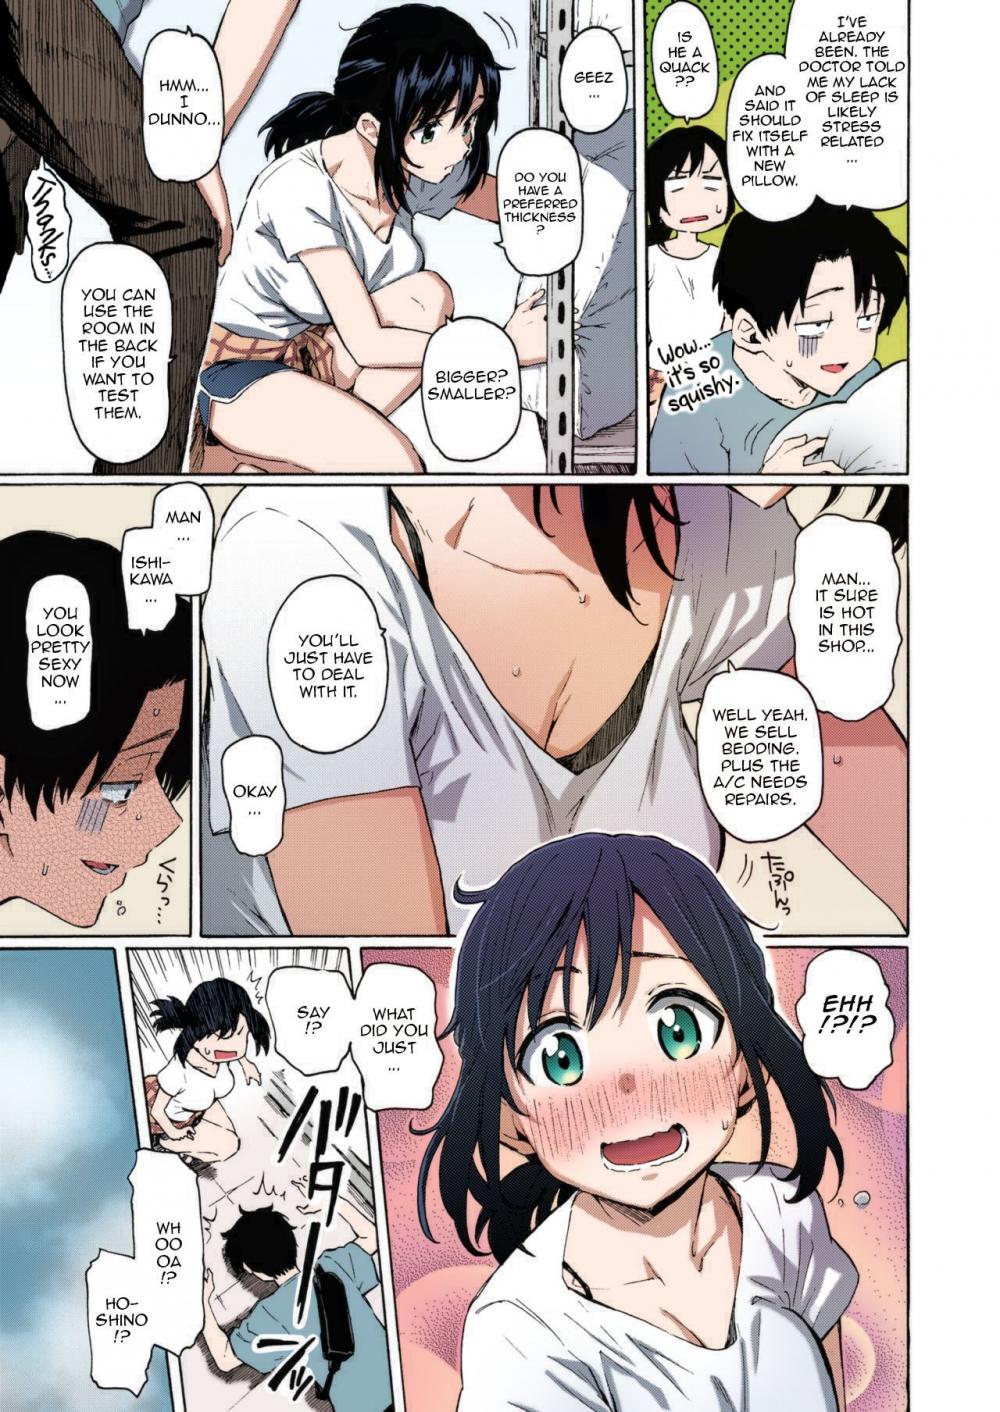 Hentai Manga Comic-You've Laid In Your Bed, Now Make It-Read-3